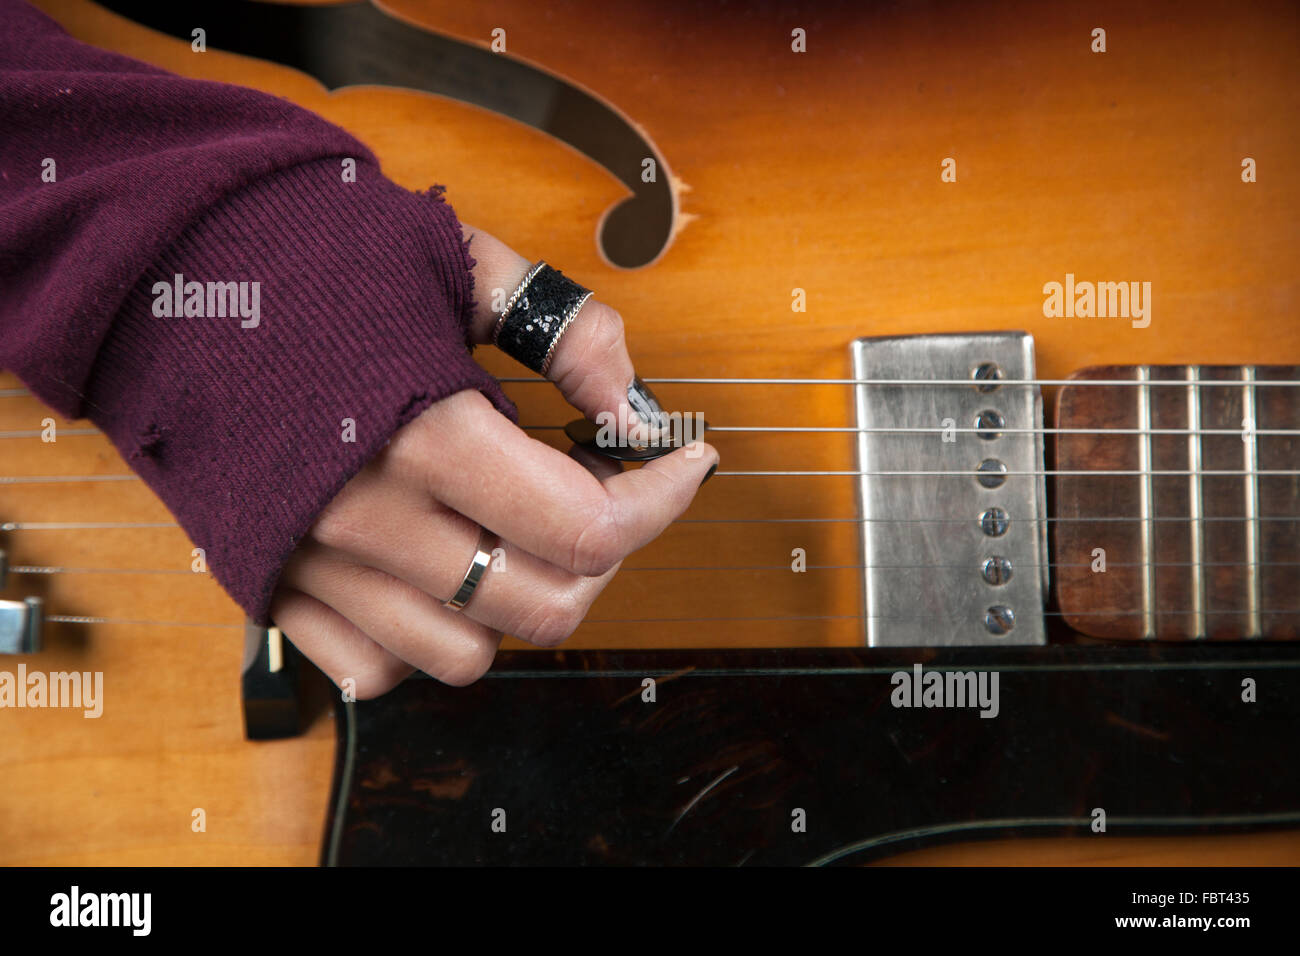 A girls hand holding a plectrum and strumming a guitar Stock Photo